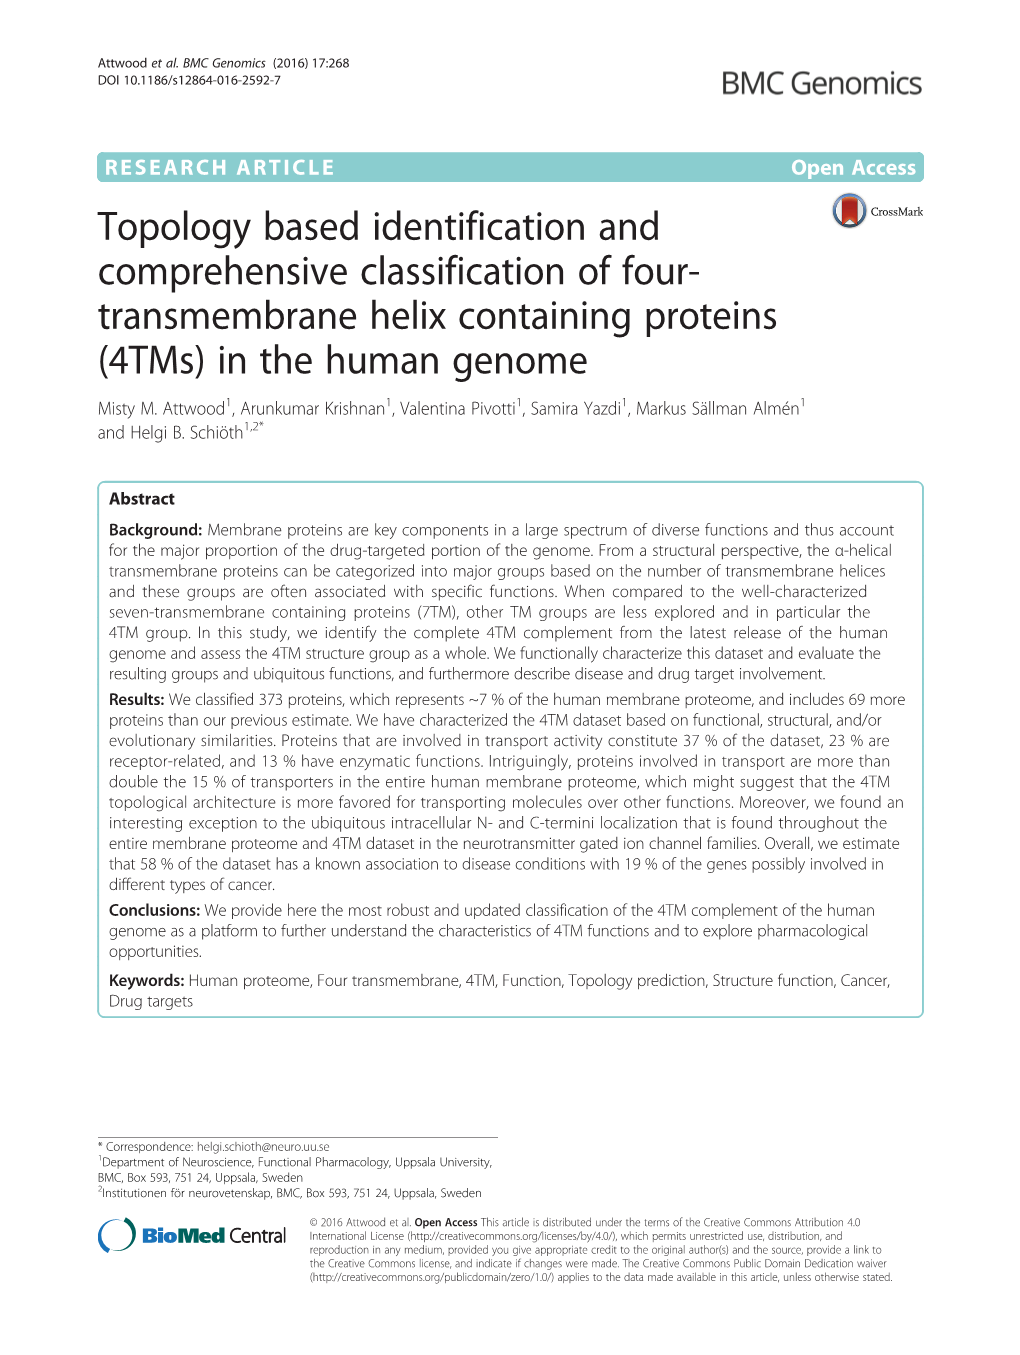 Transmembrane Helix Containing Proteins (4Tms) in the Human Genome Misty M